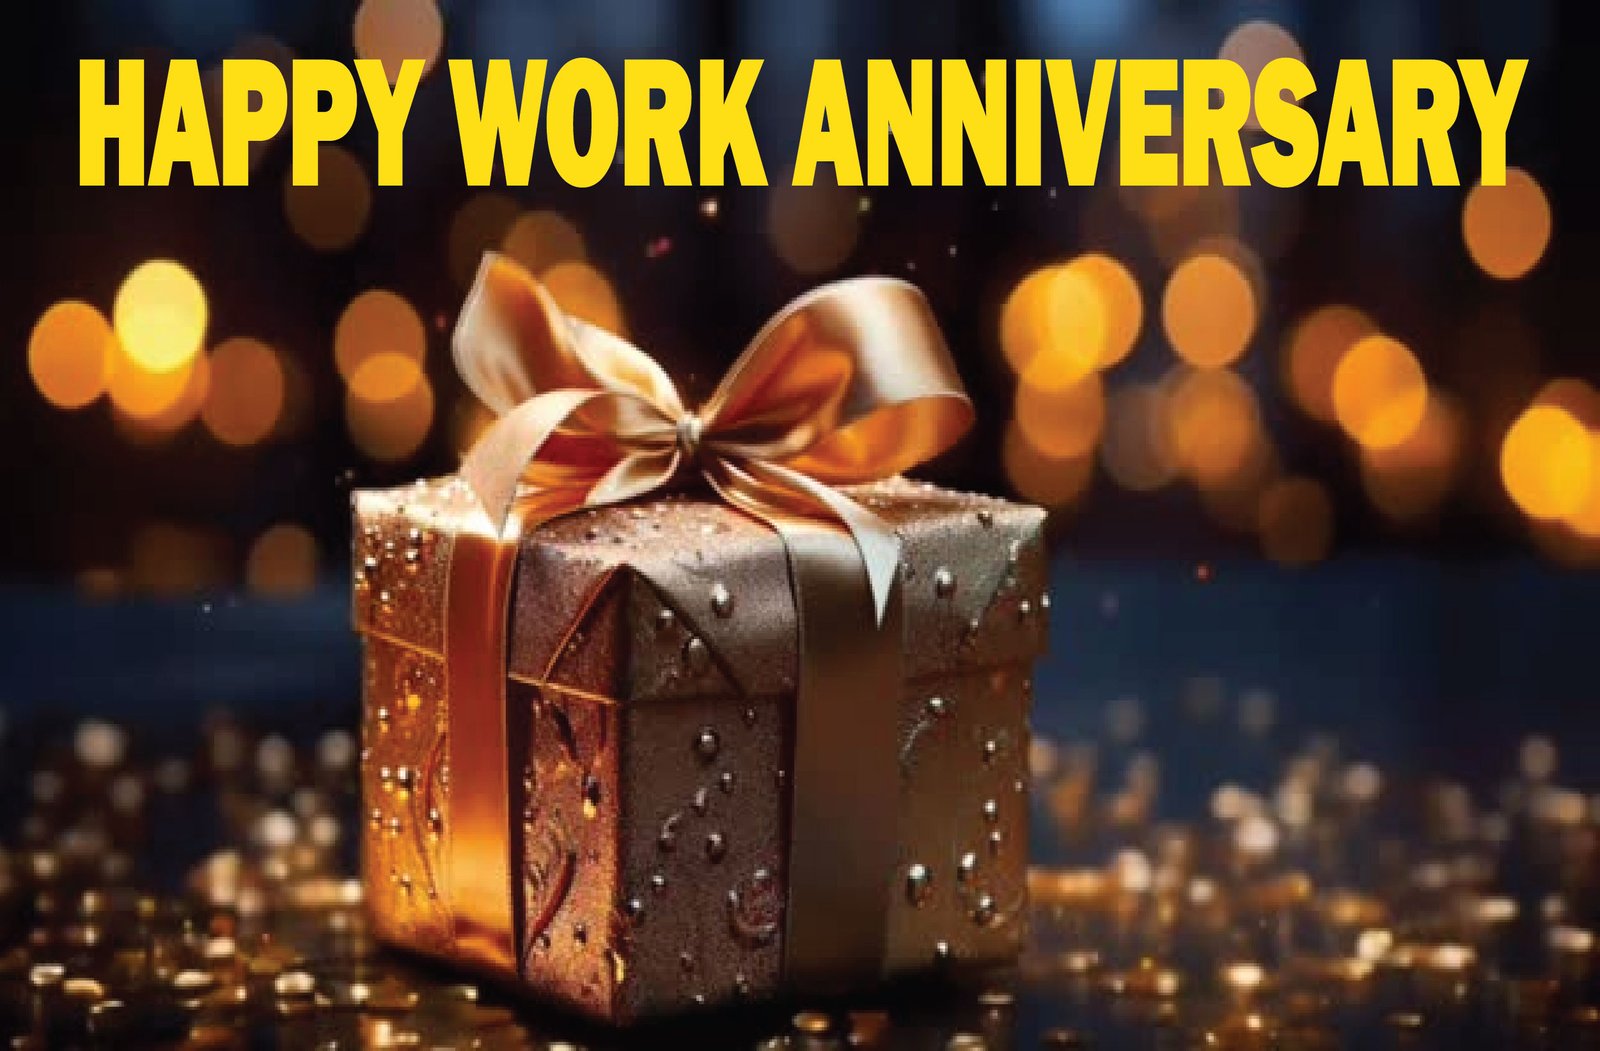 Happy Work Anniversary Success: A Special Year of Wins!